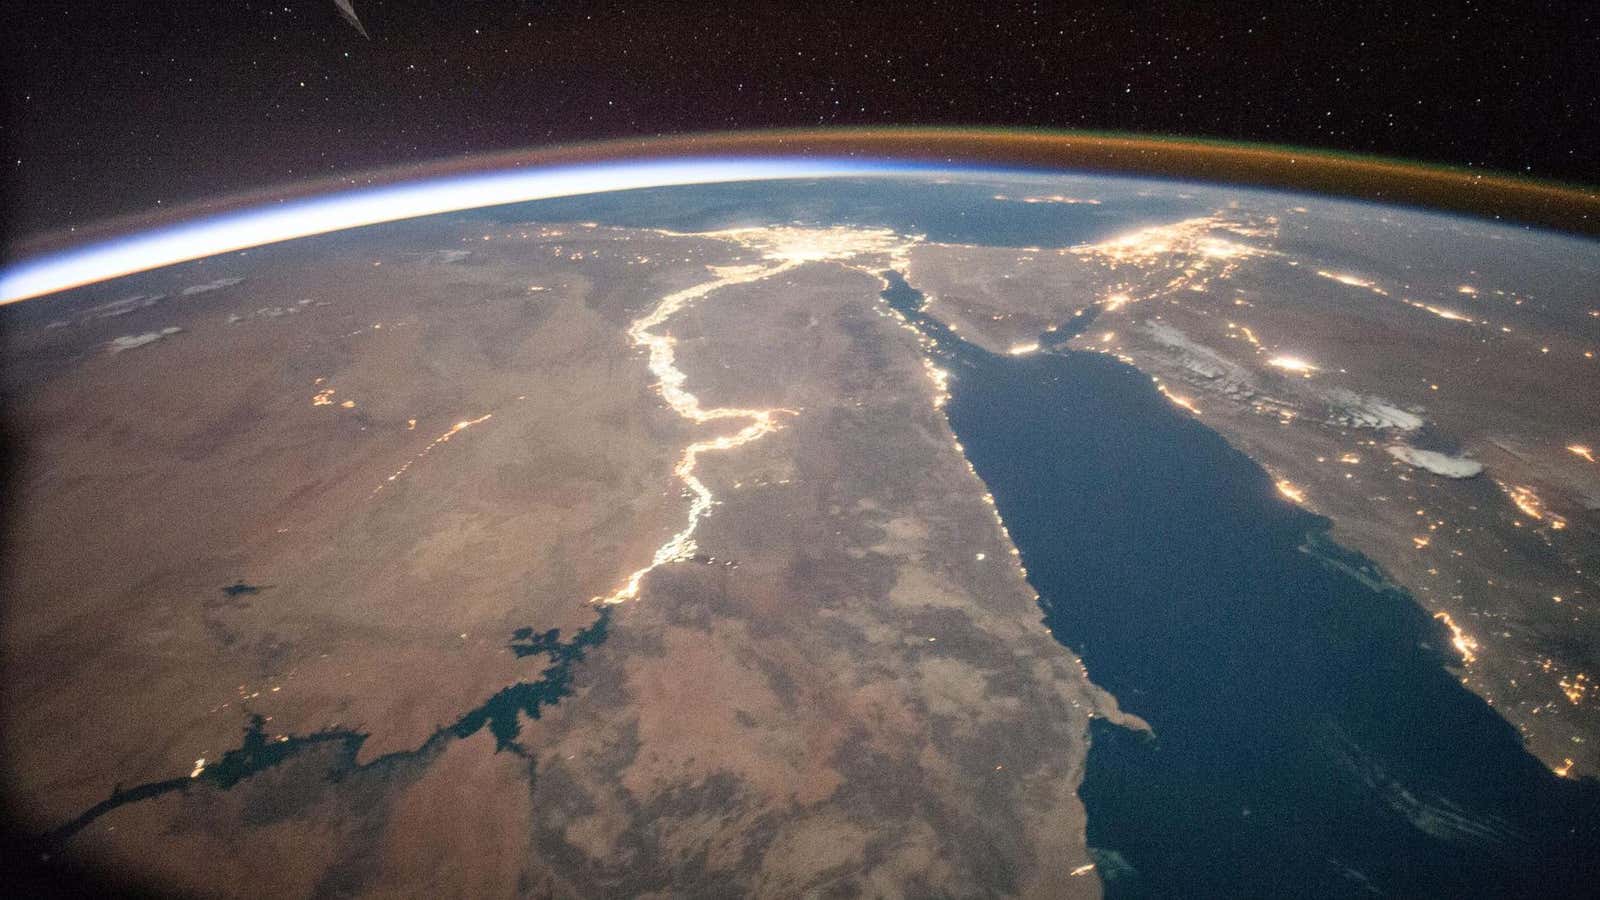 The magnificent Nile at night in 2015.